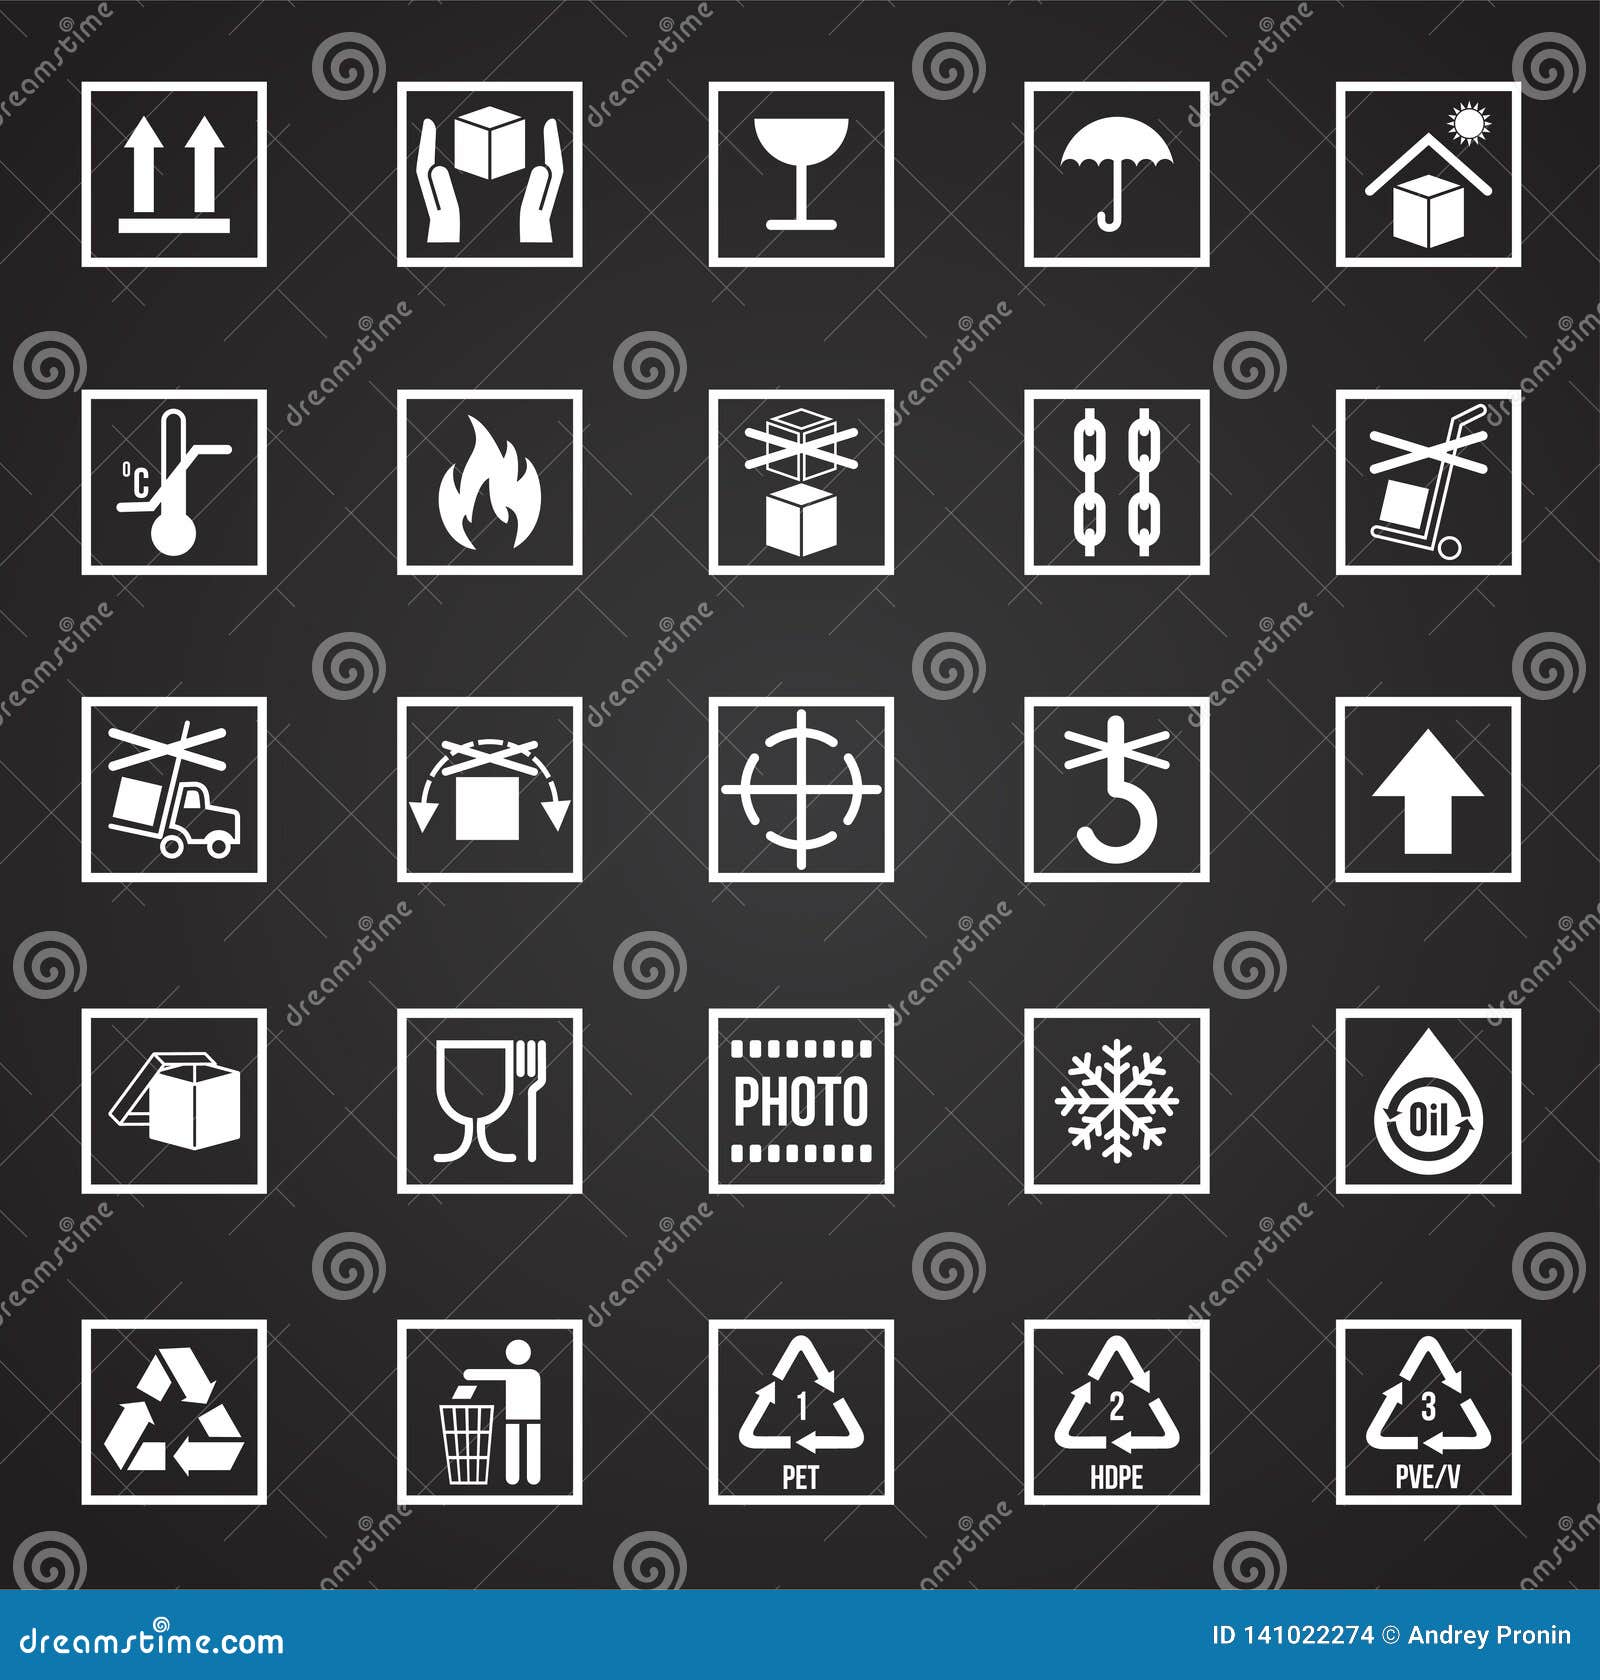 Download Packaging Symbol Icons On Black Background For Graphic And ...